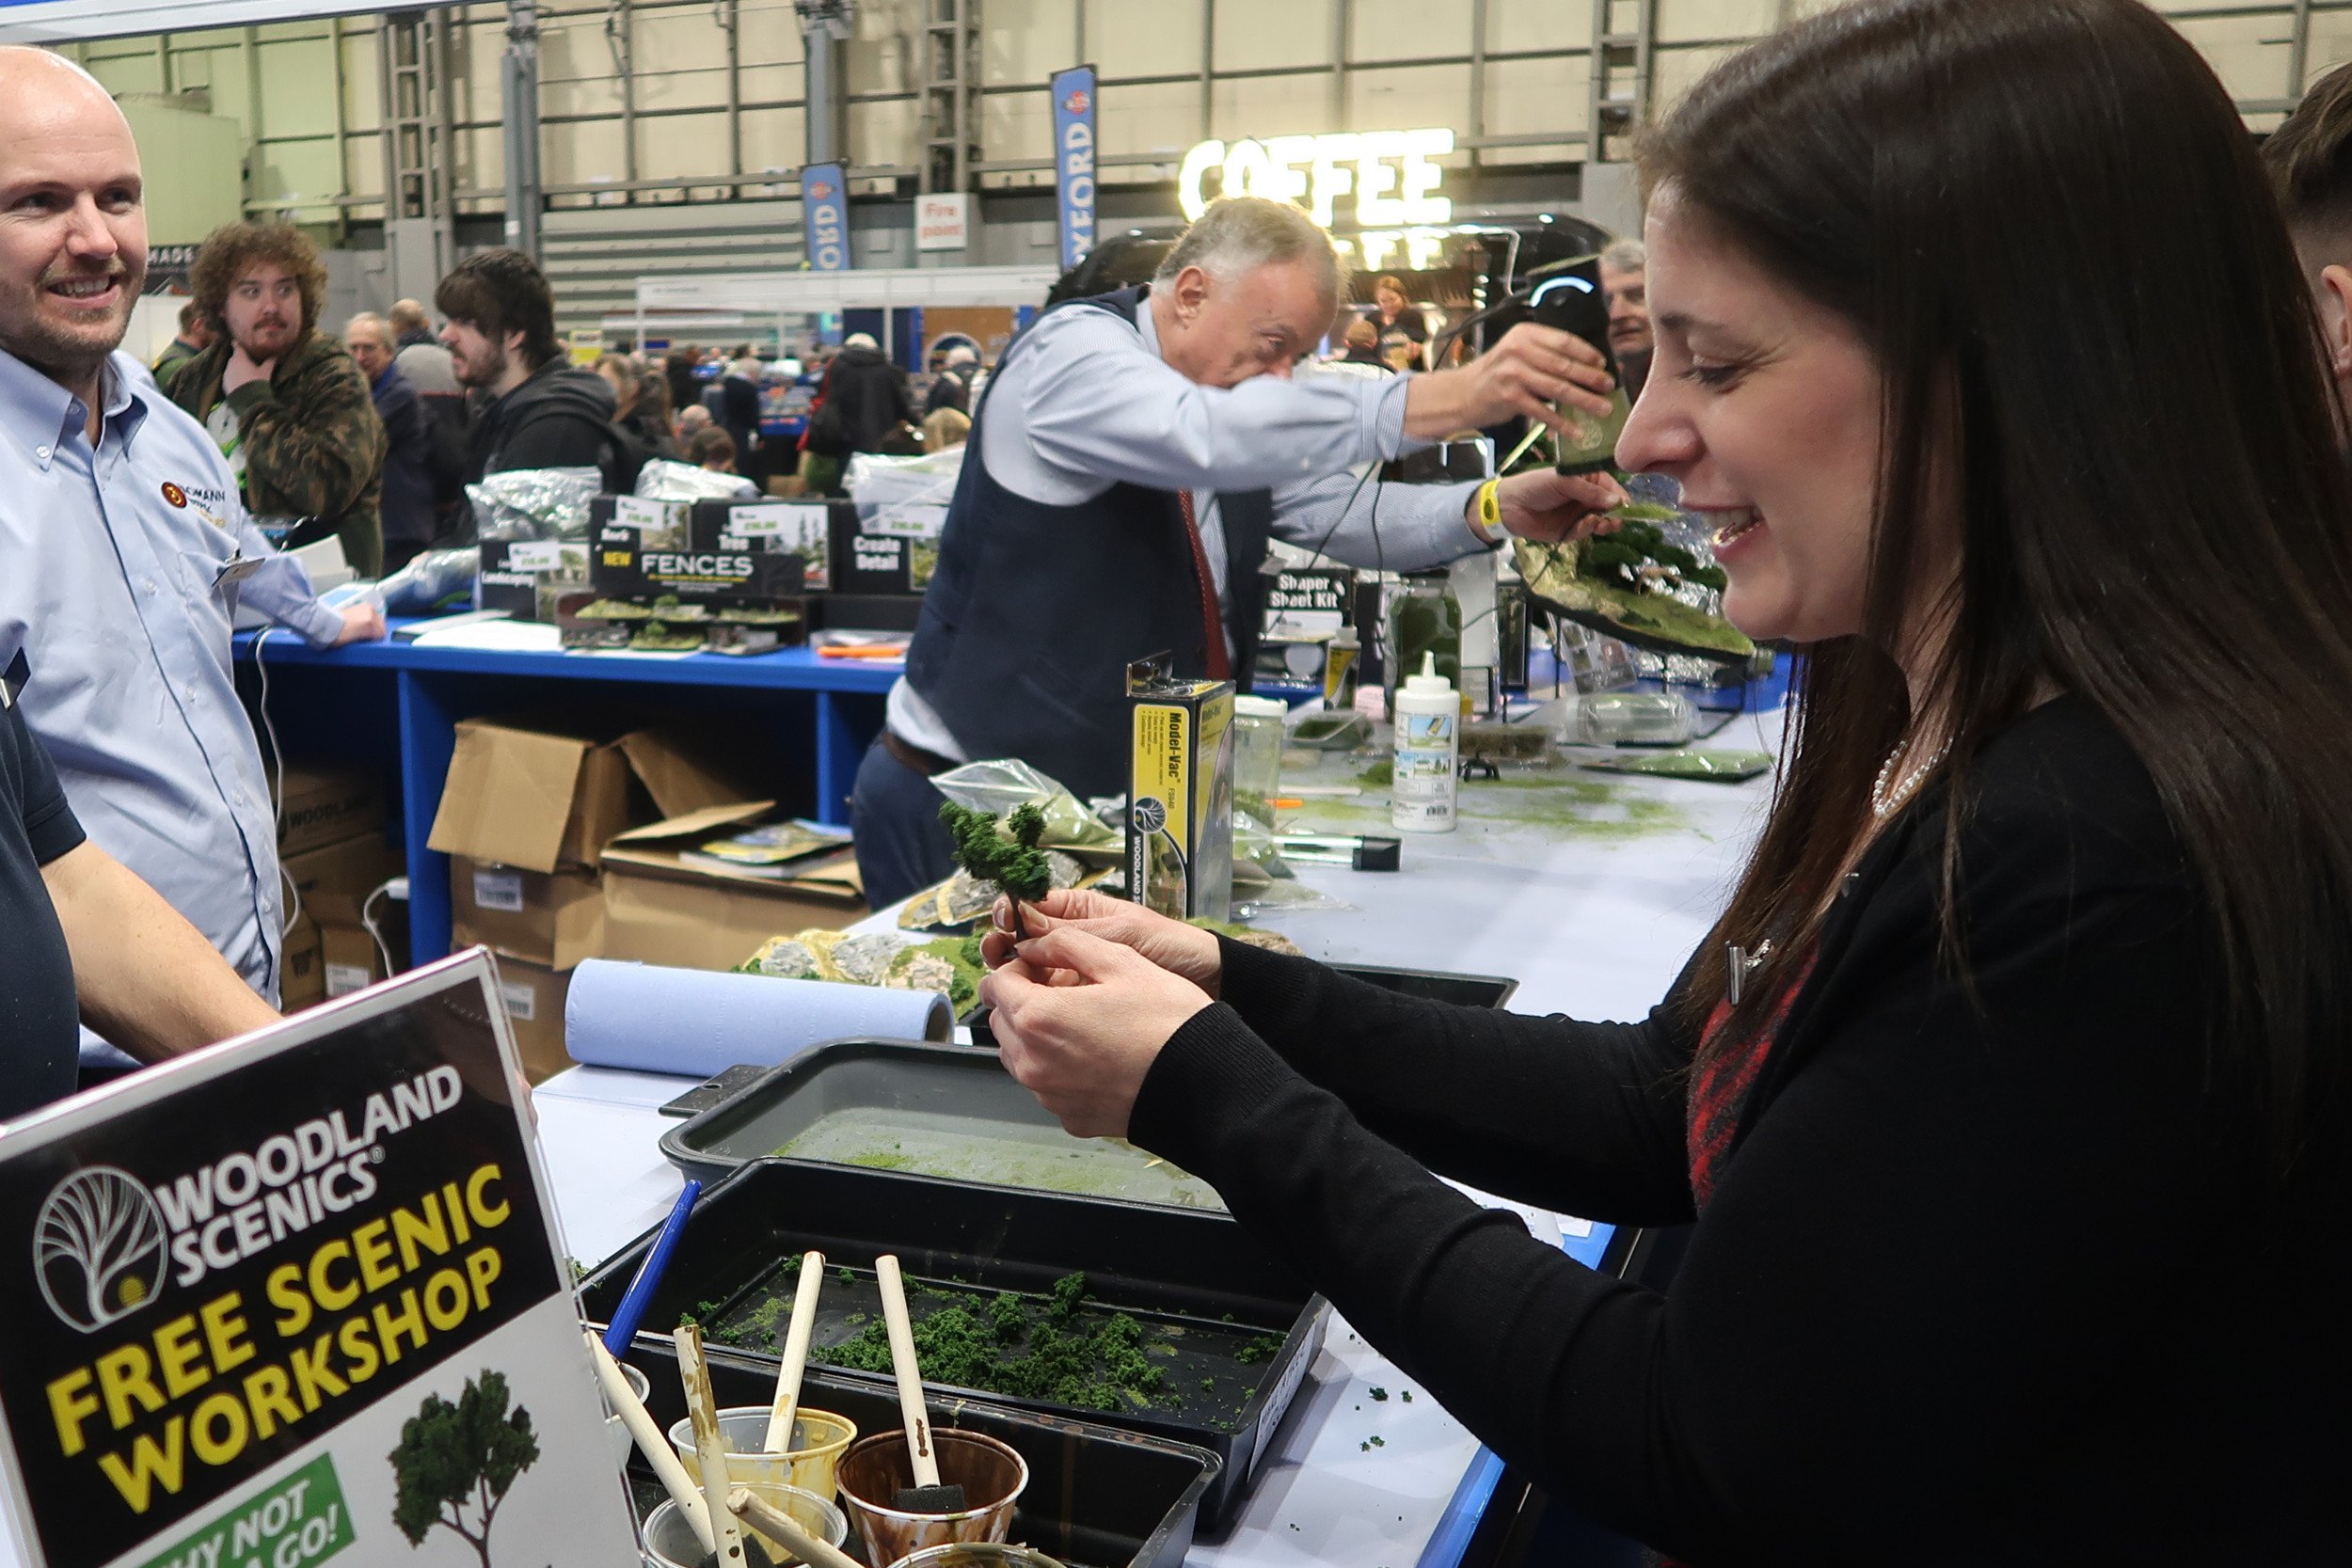 Visit the MCC stand at Model World LIVE to learn how to create scenery with Woodland Scenics products.